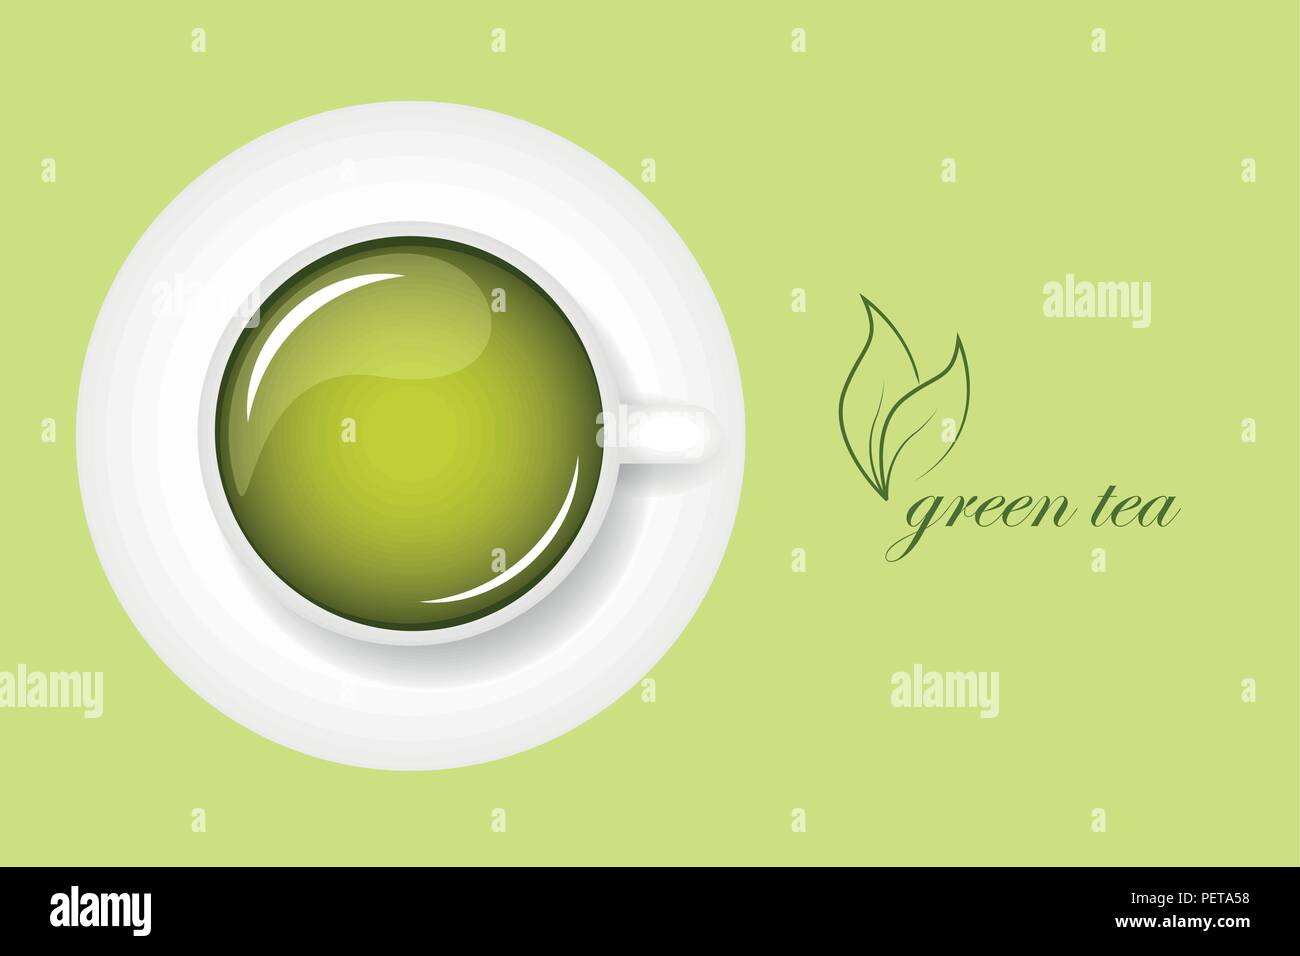 green tea in a white cup vector illustration EPS10 Stock Vector